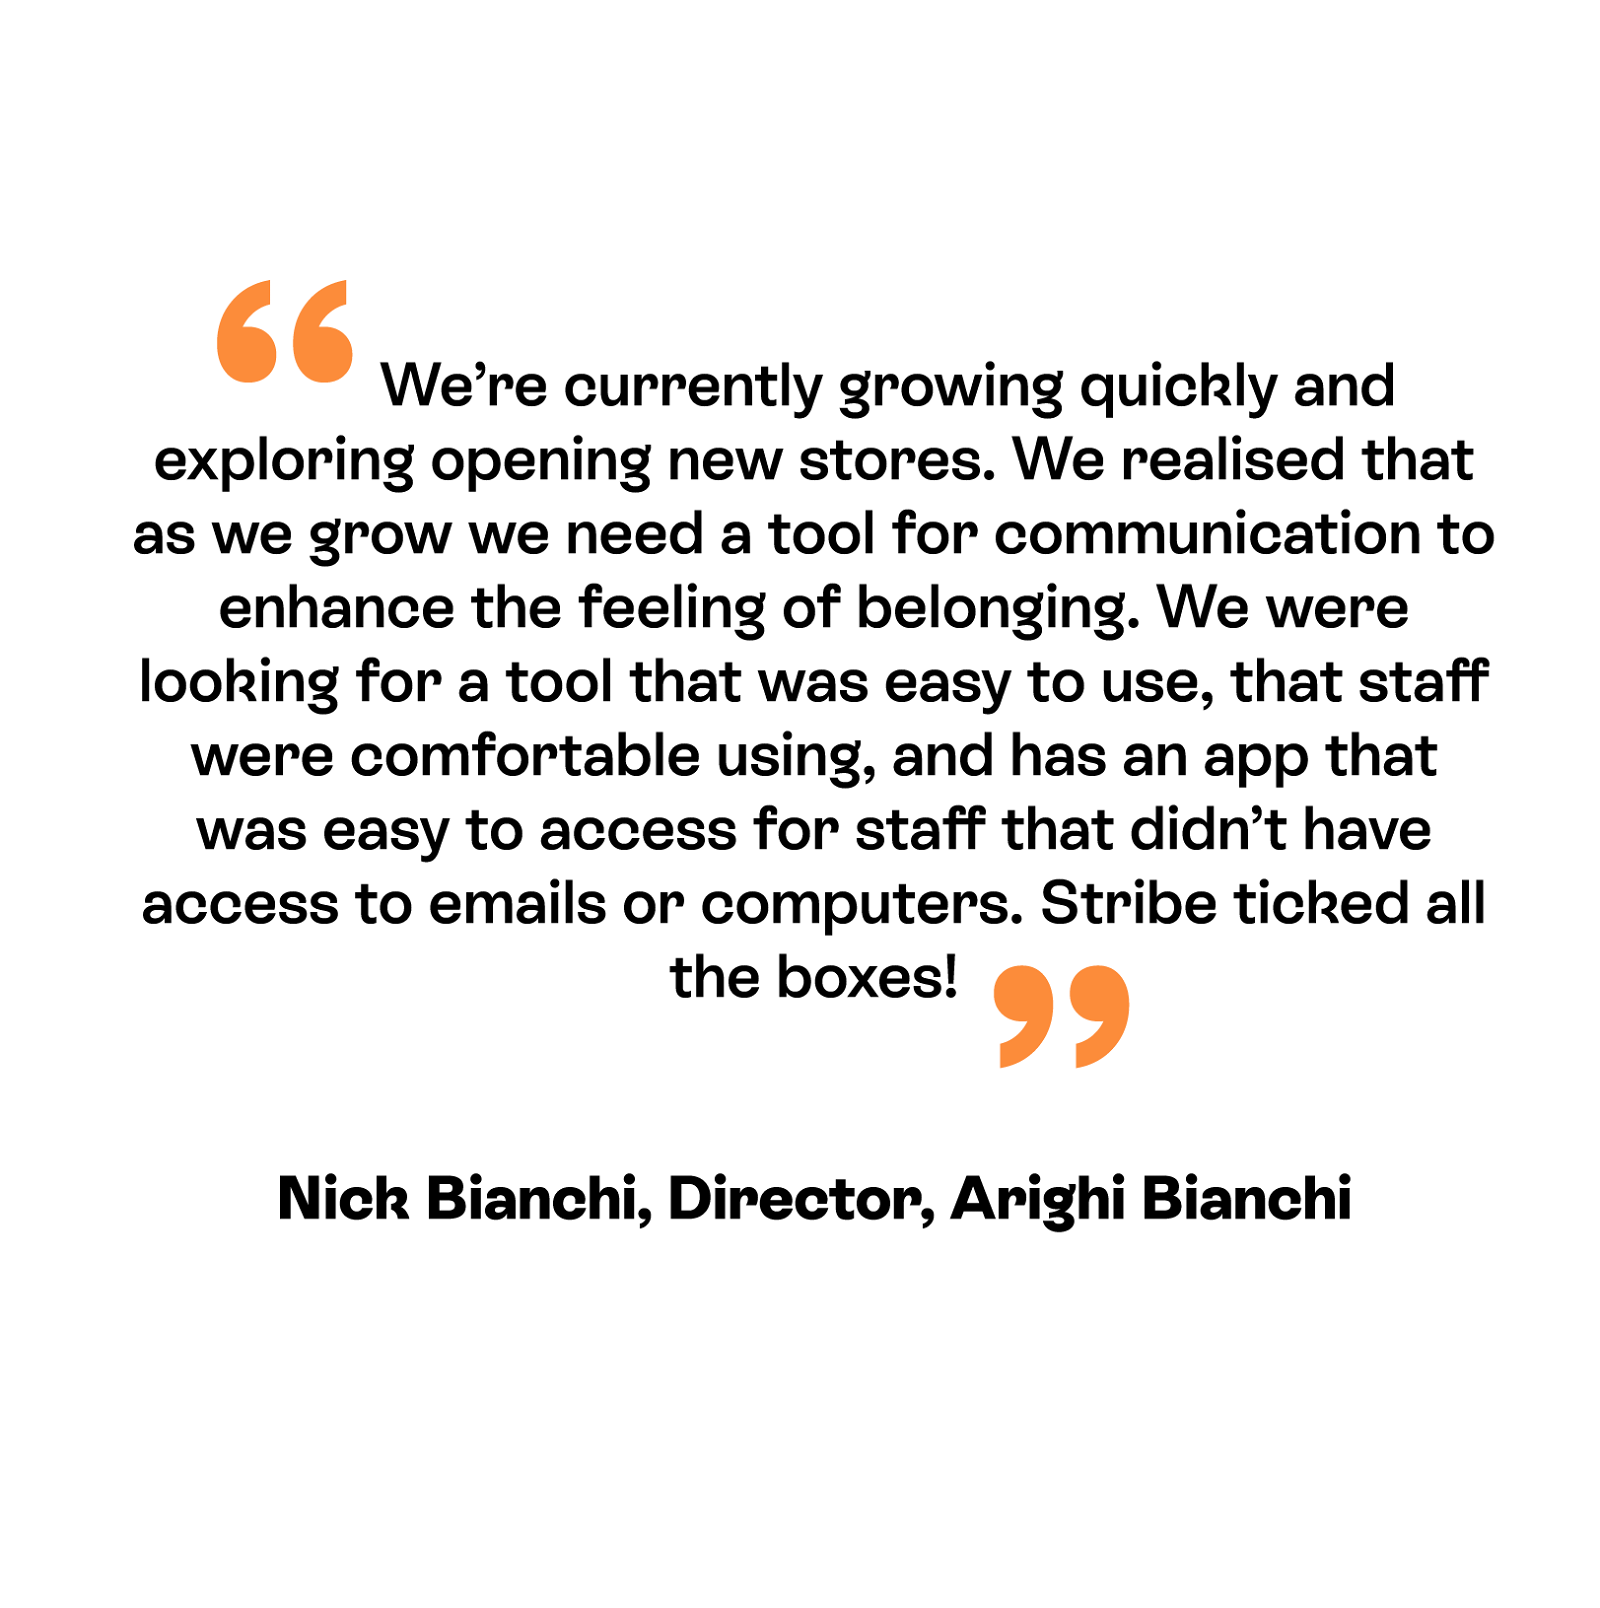 A positive testimonial for Stribe from a manager at Arighi Bianchi.